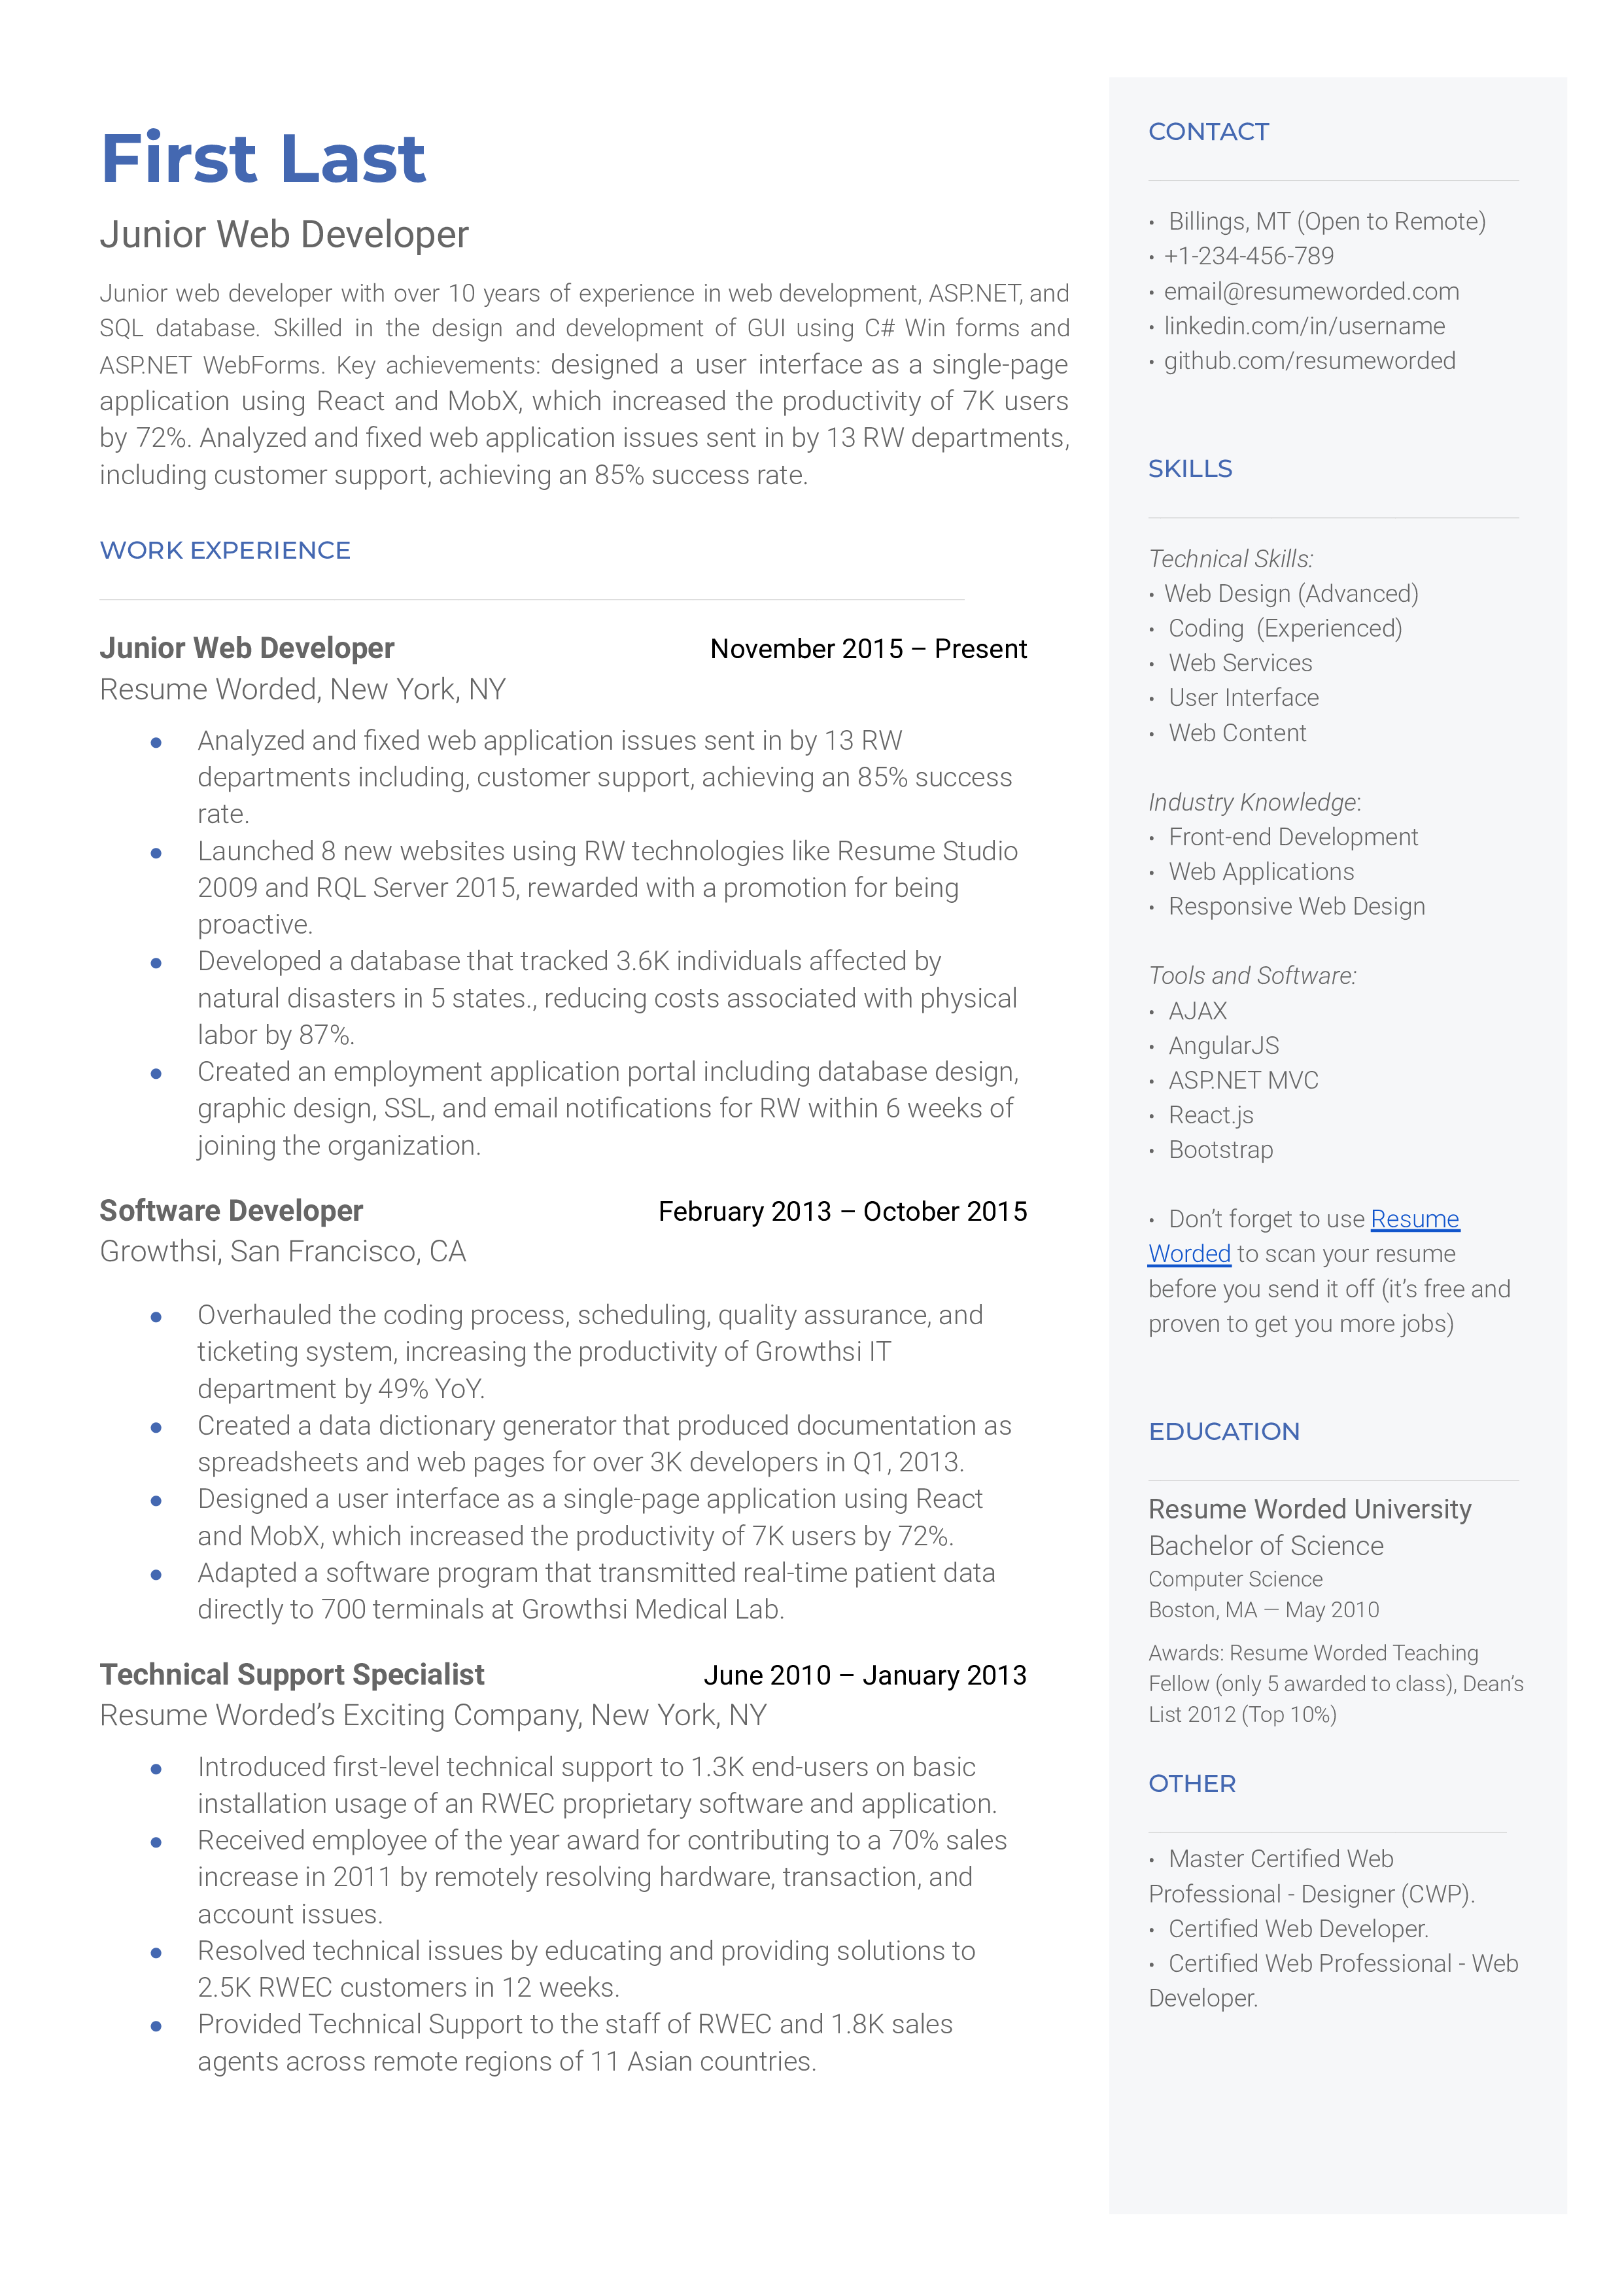 A junior web developer resume sample that highlights the applicant’s certifications and skill set.